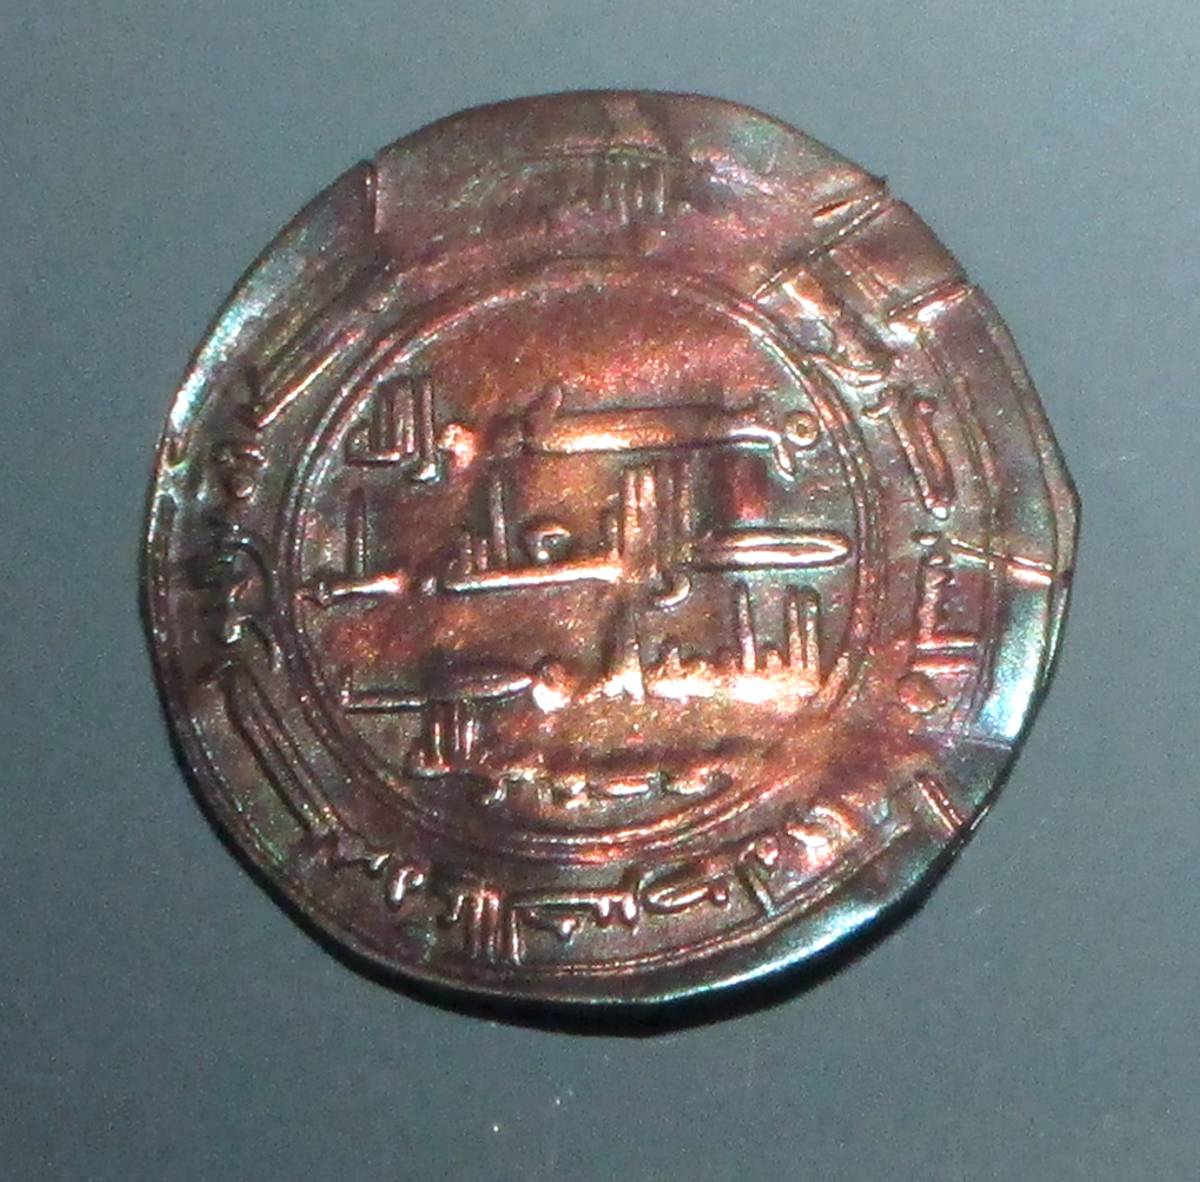 Khazar coin, the so-called Moses coin, from the Spillings Hoard at Gotland Museum, Visby, Sweden